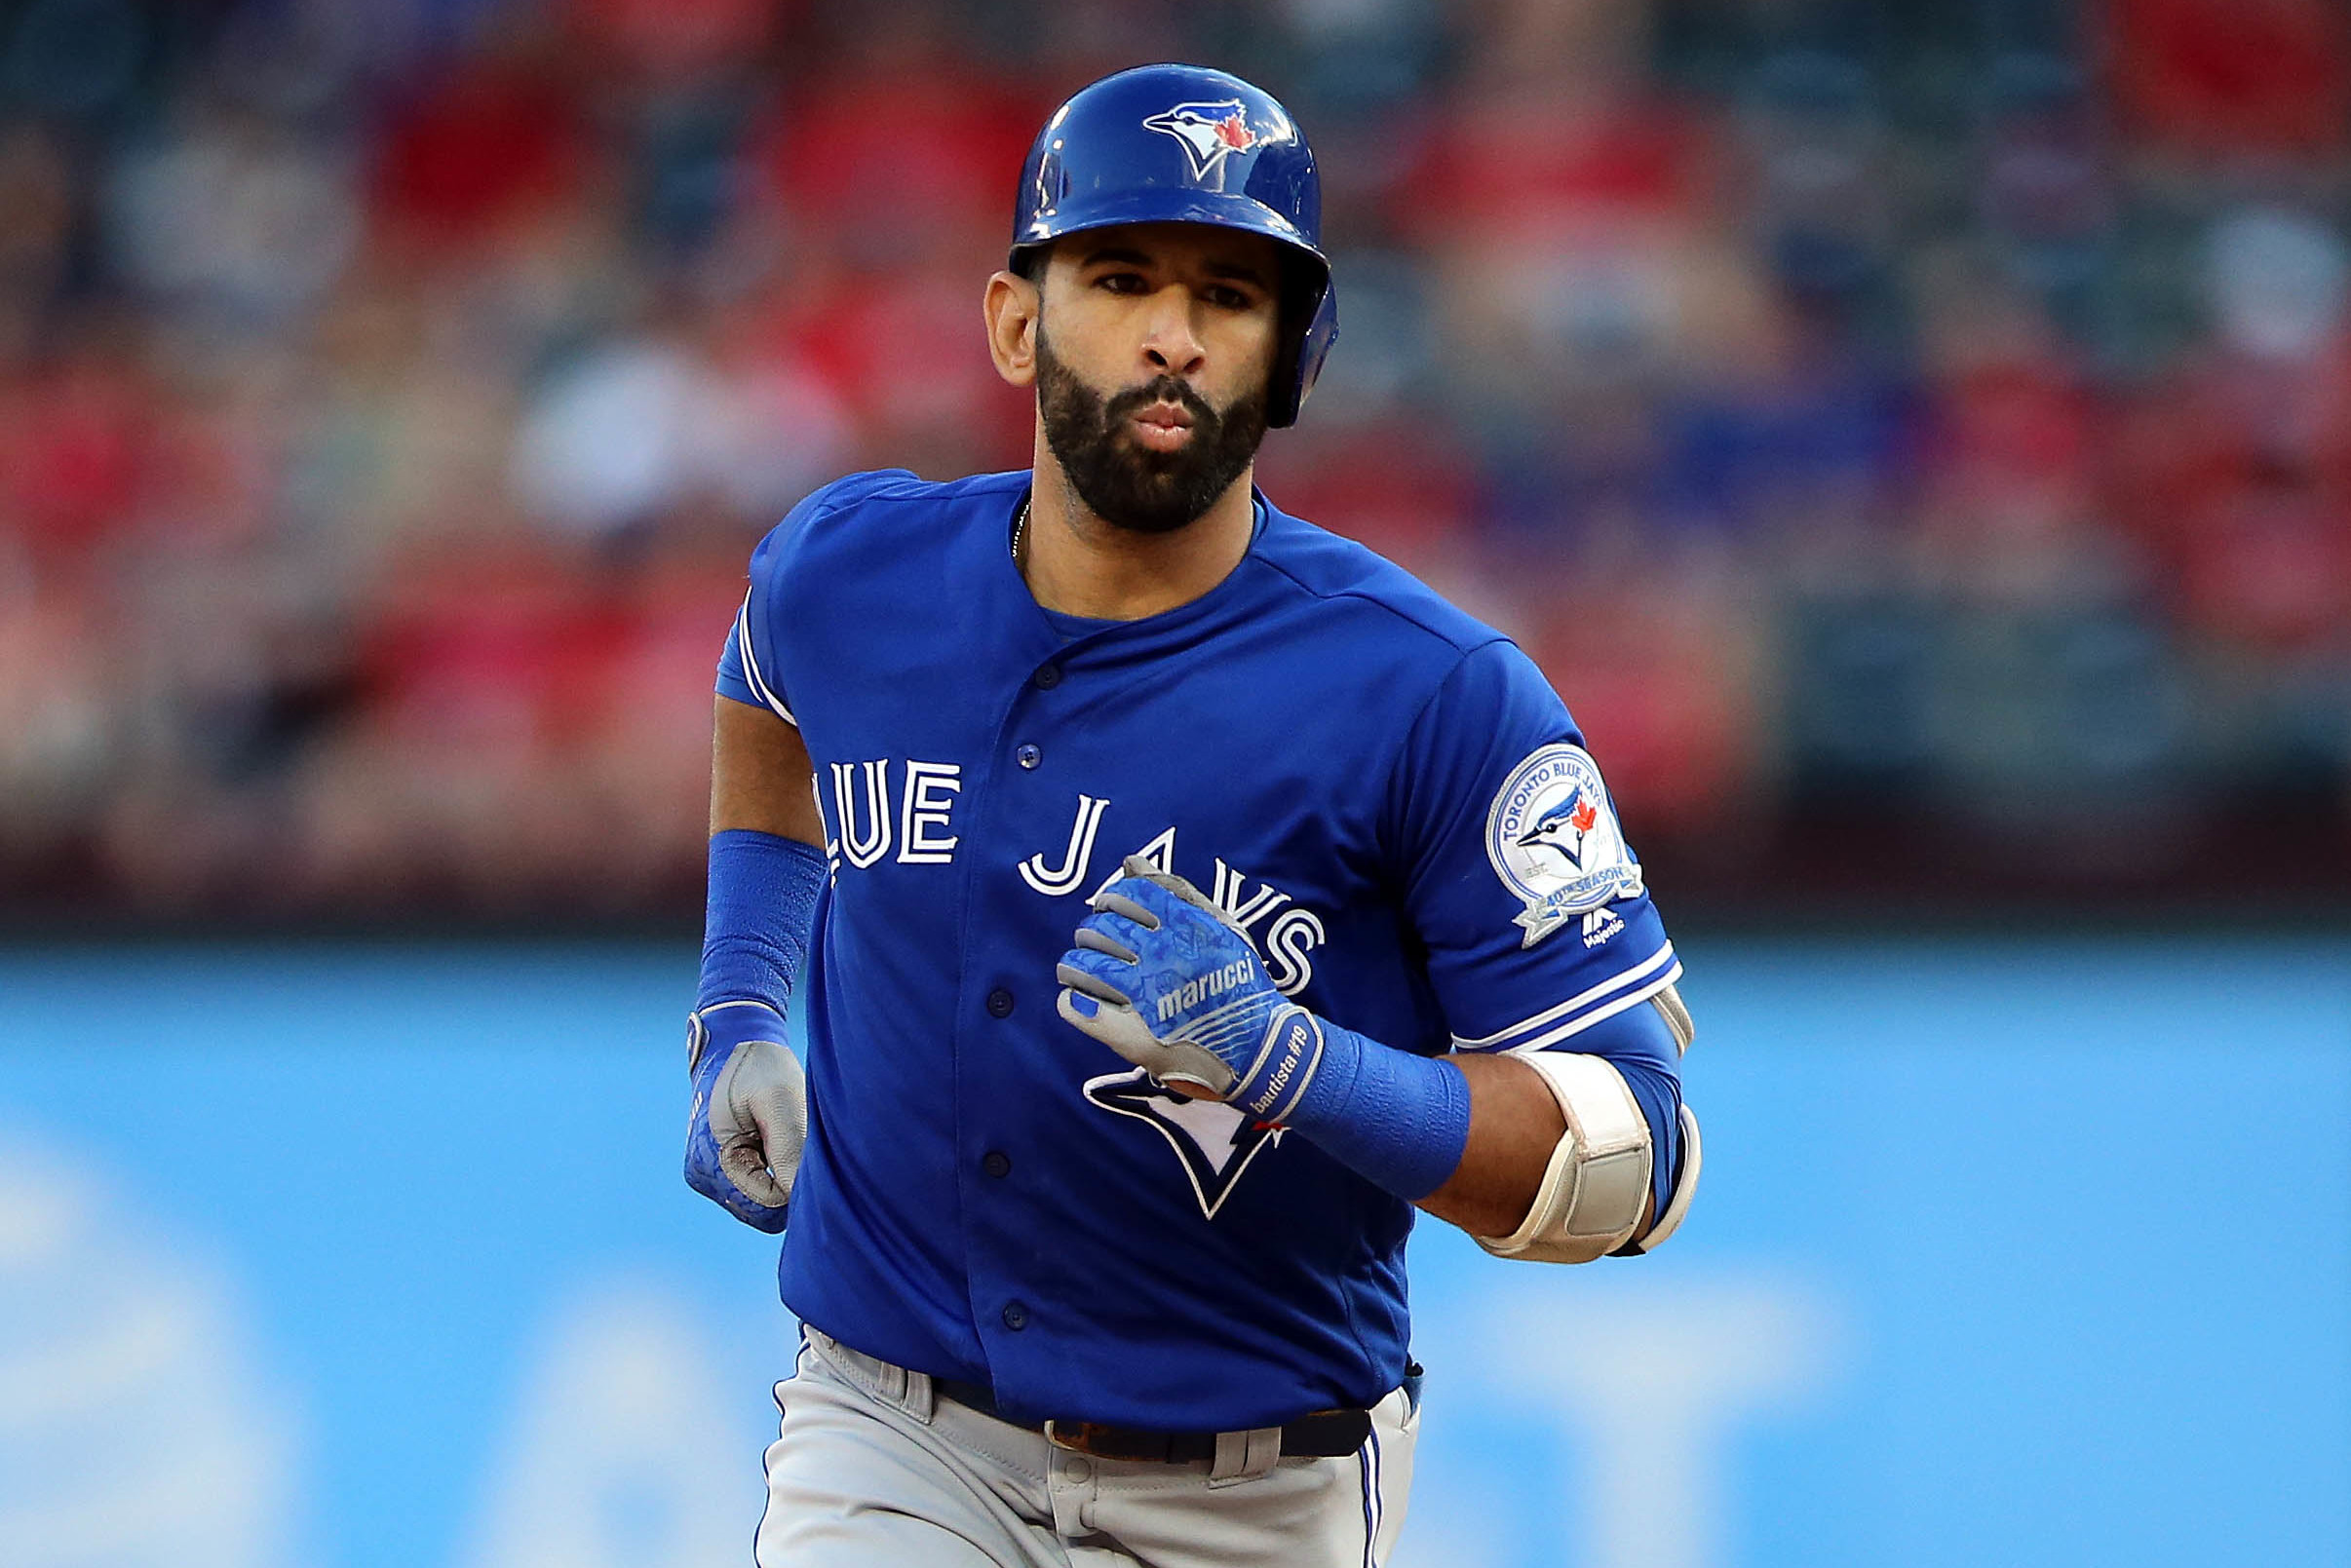 ESPN - Show your support for Toronto Blue Jays outfielder Jose Bautista.